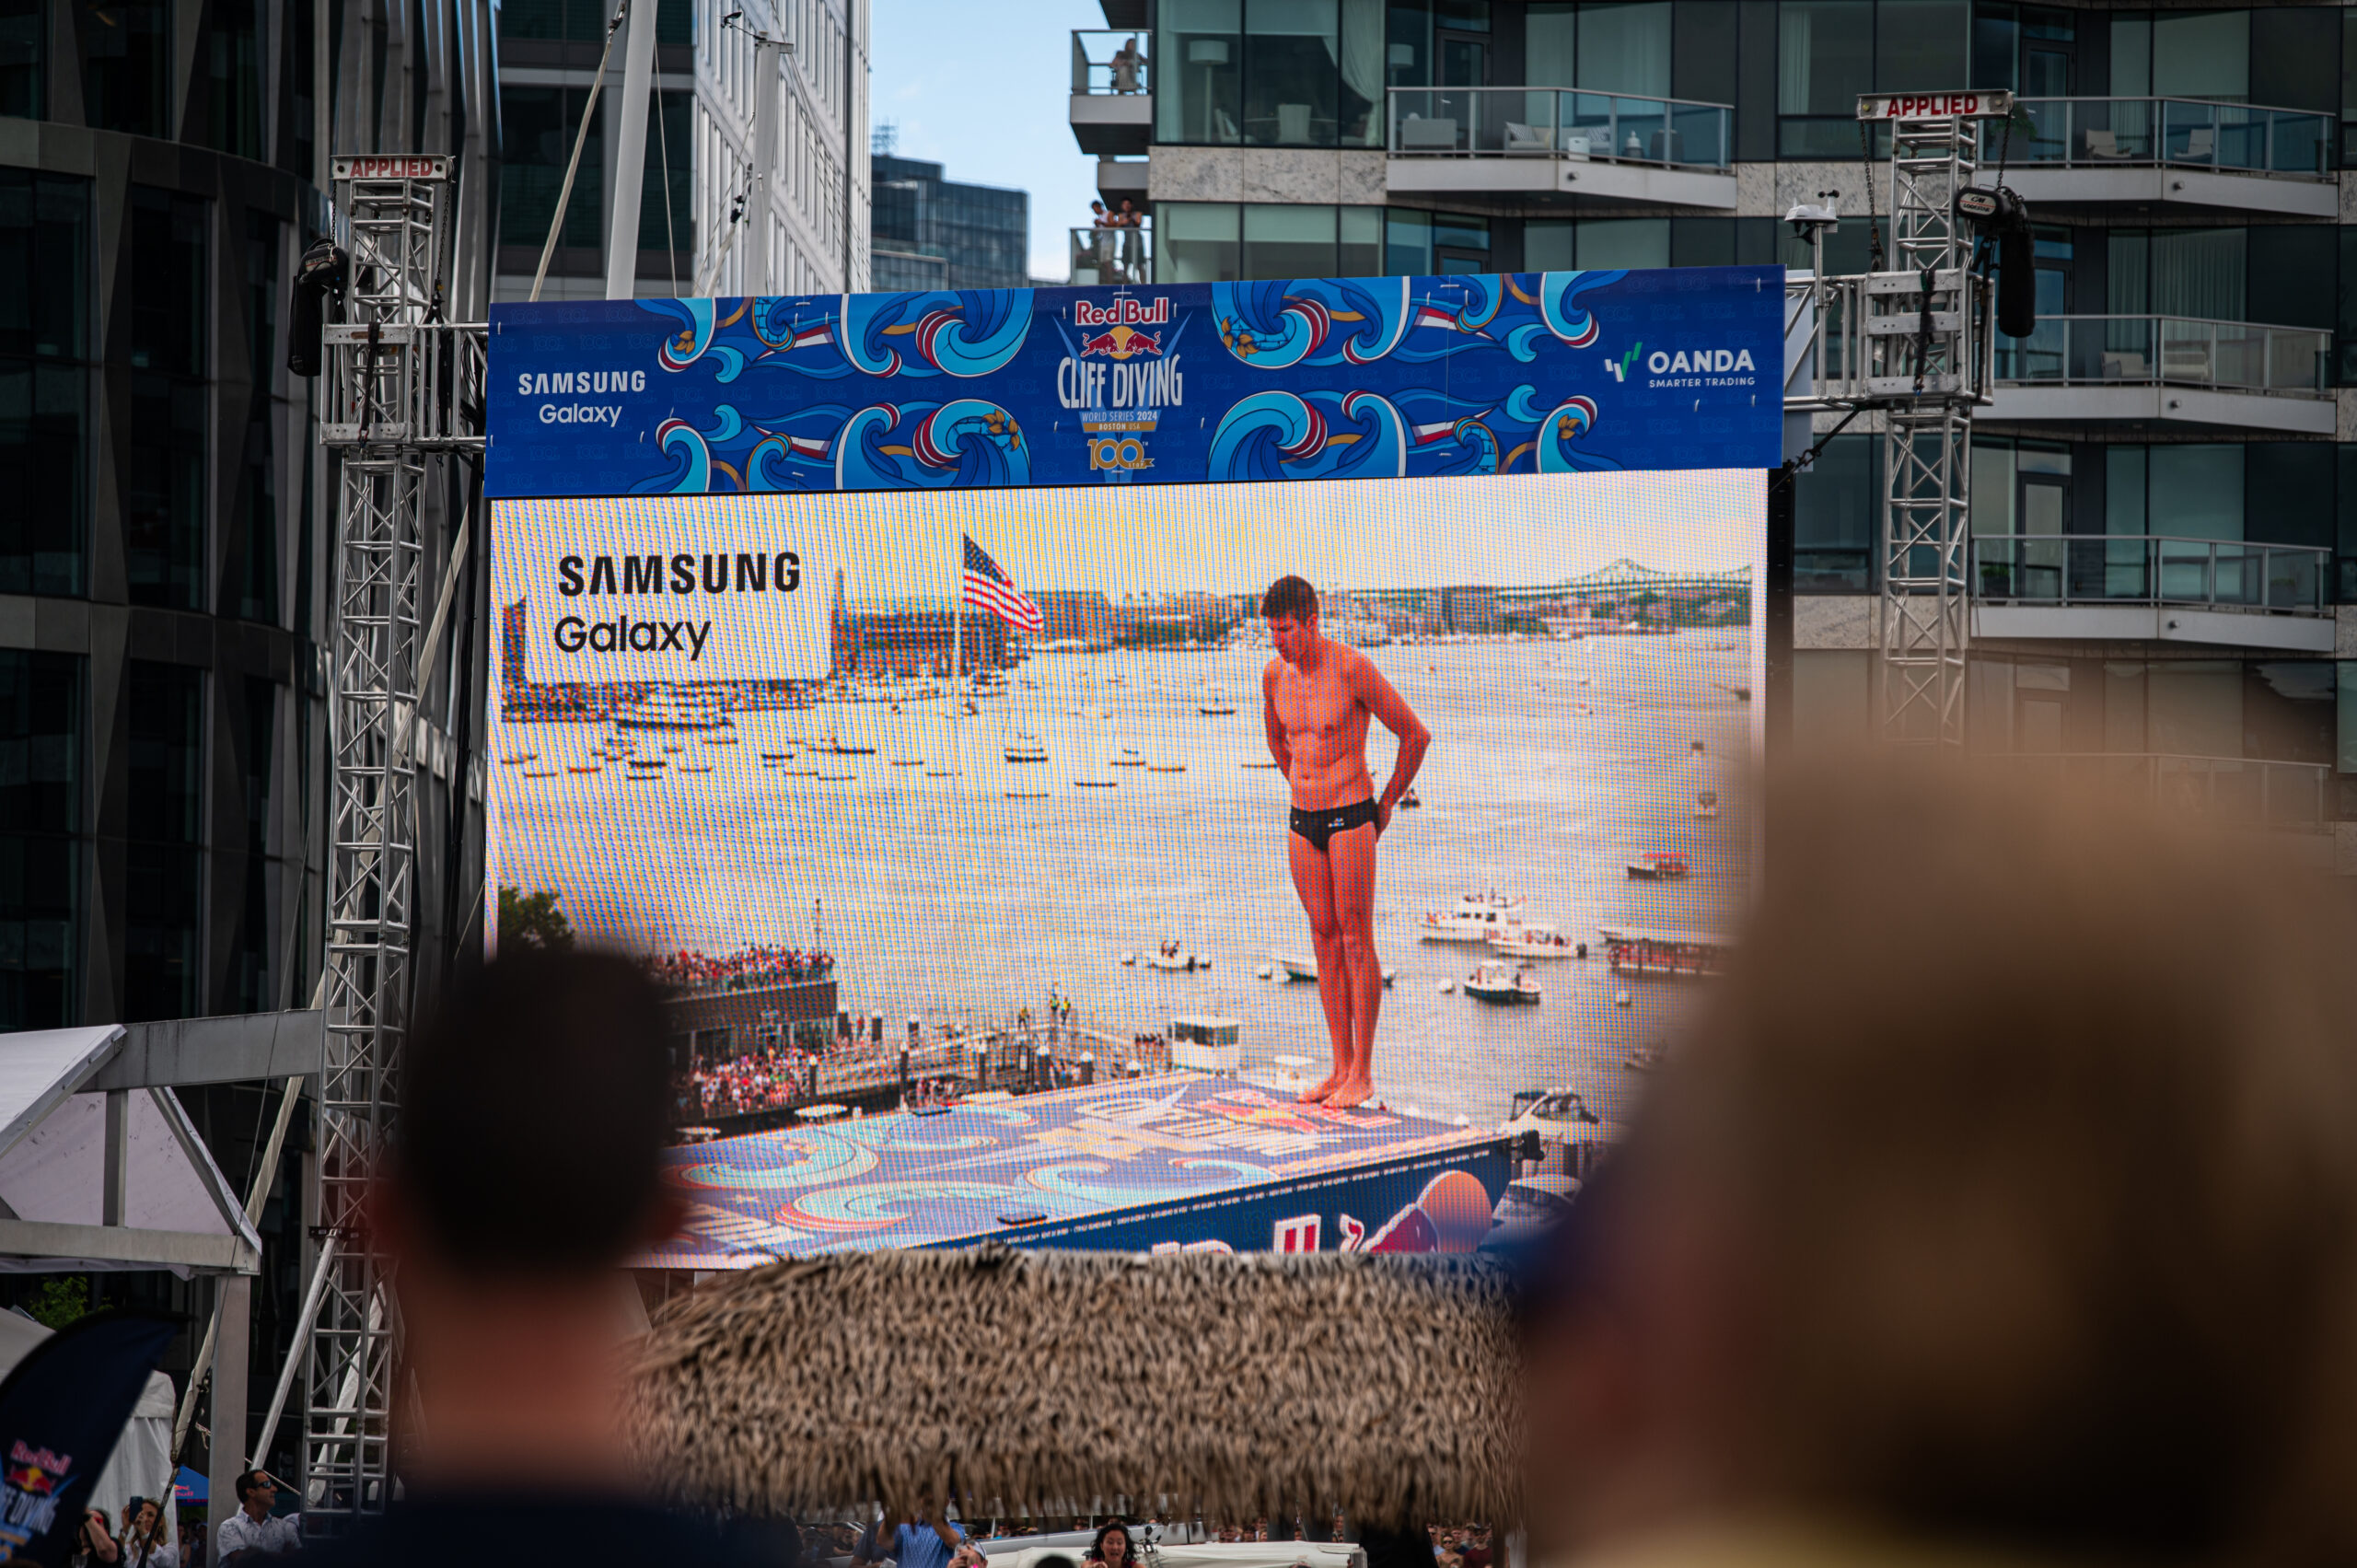 A view of a diver from the Samsung Galaxy digital jumbotron